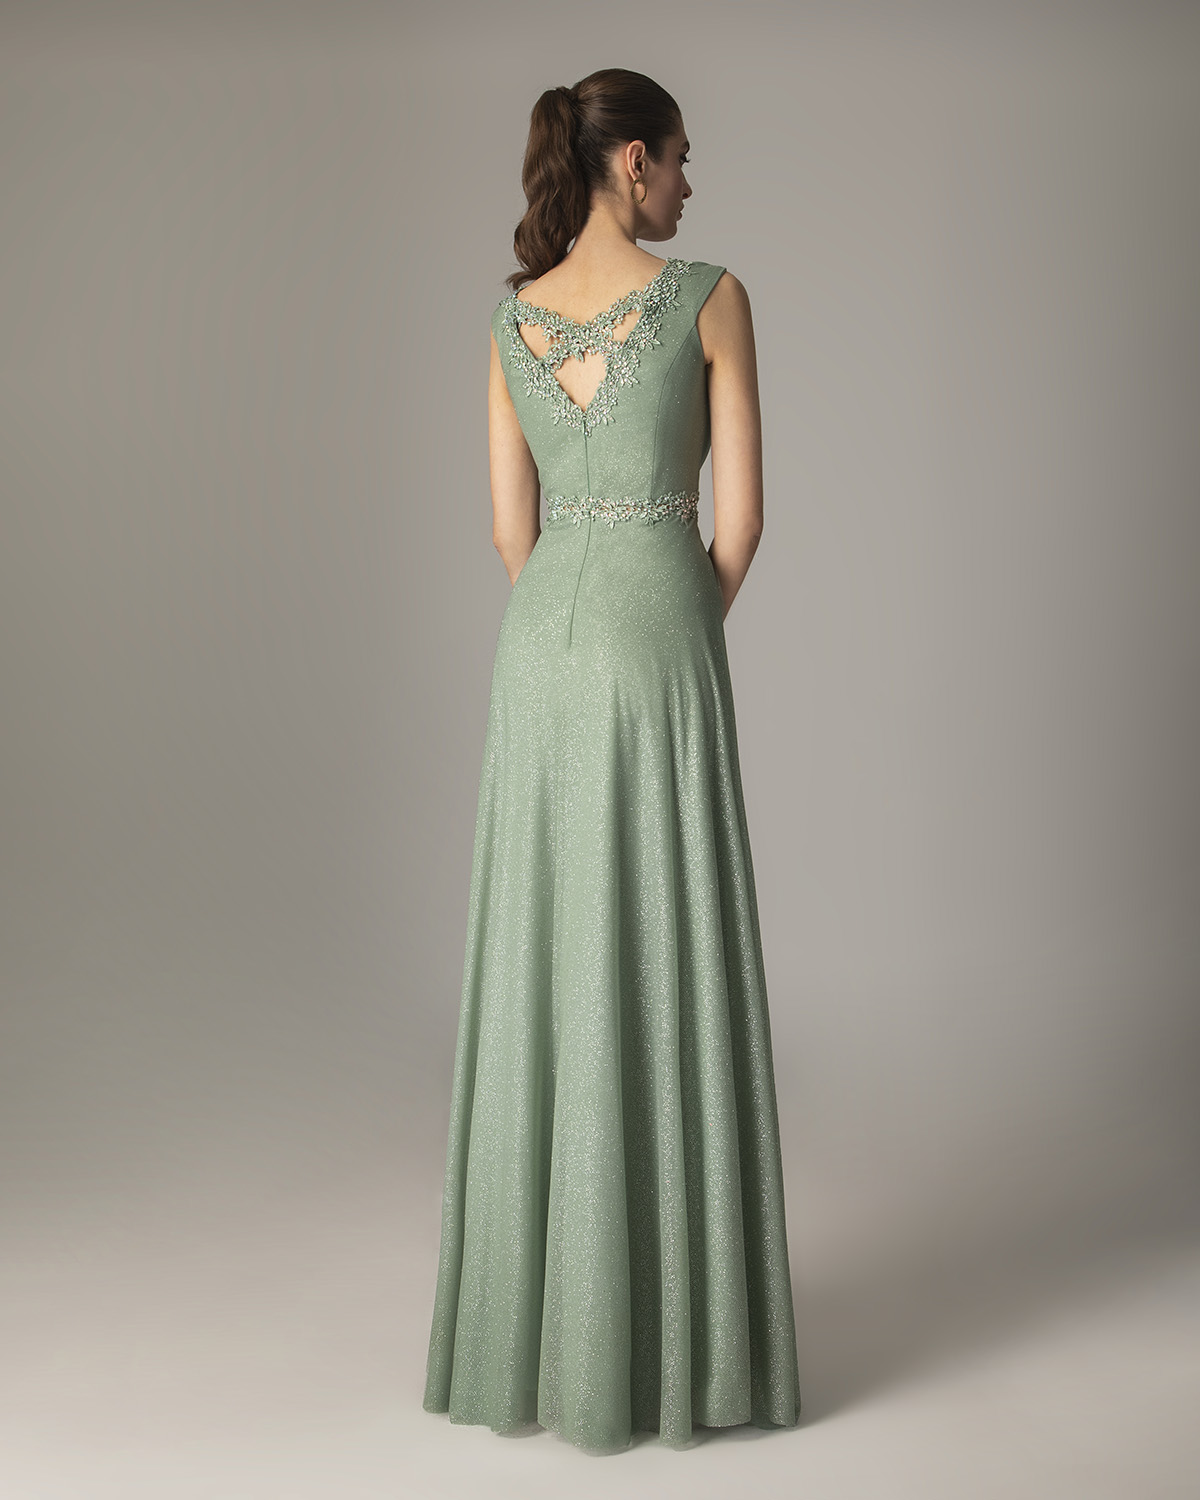 Cocktail Dresses / Long dress with shining fabric and beading on the waist and the top